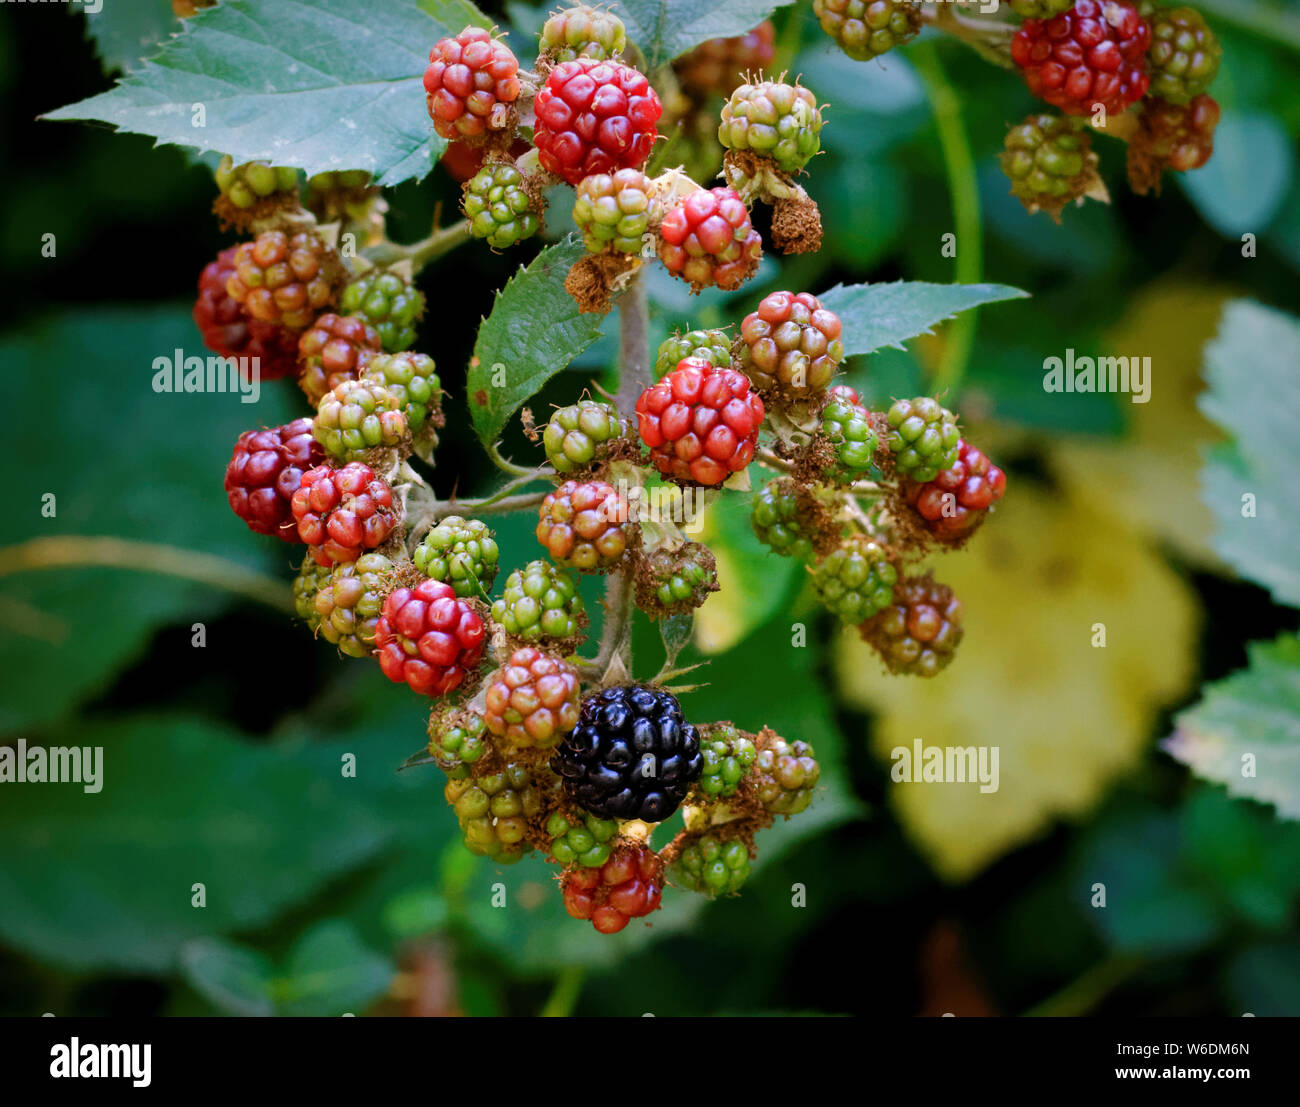 green, red and black berries on a blackberry bush Stock Photo